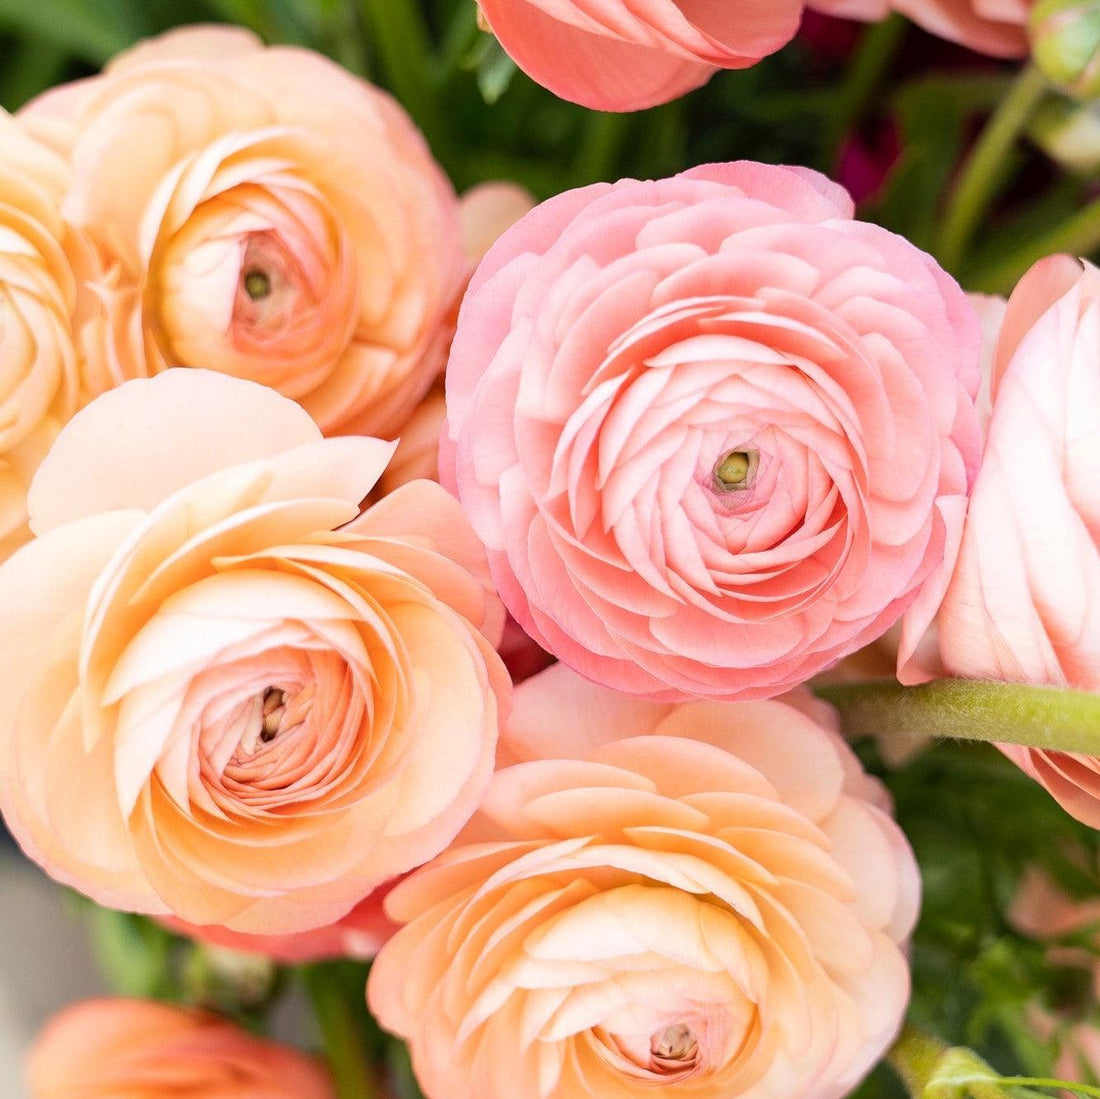 Our guide to spring flowers: Ranunculus, the rose of spring - by Cabane - sustainable floral design studio in California